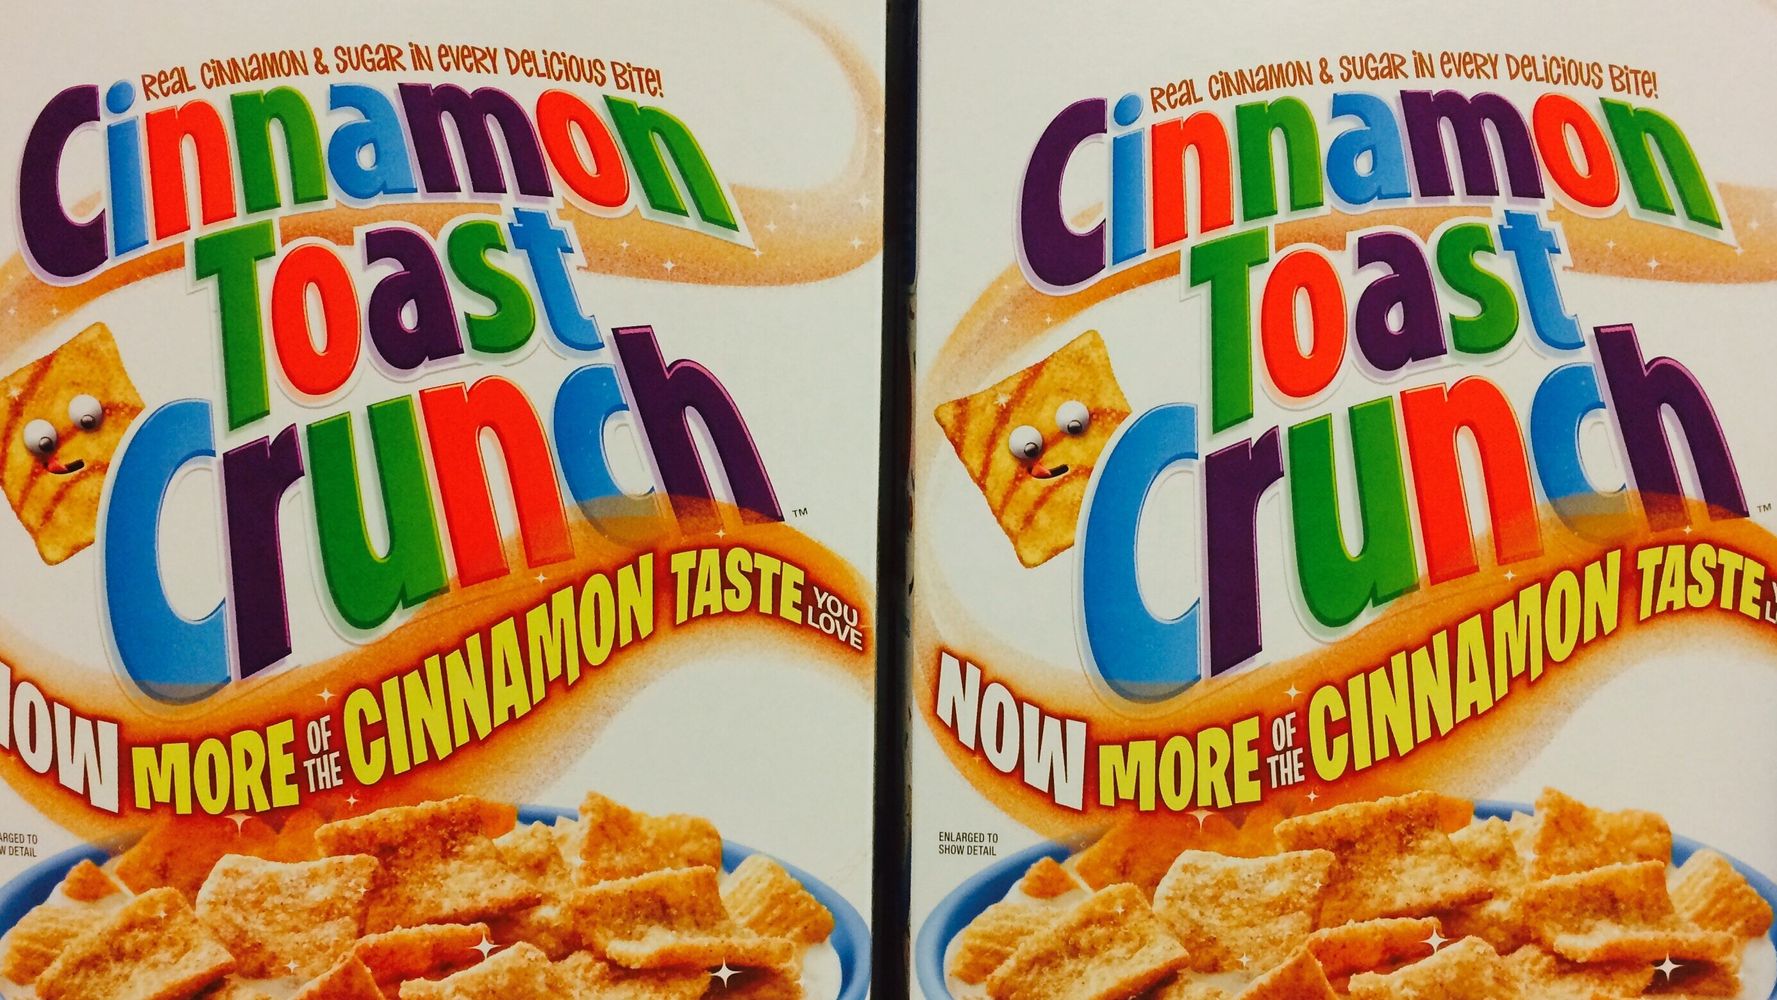 Cinnamon Toast Crunch ‘Investigating’ Claiming Shrimp Tails in Cereals